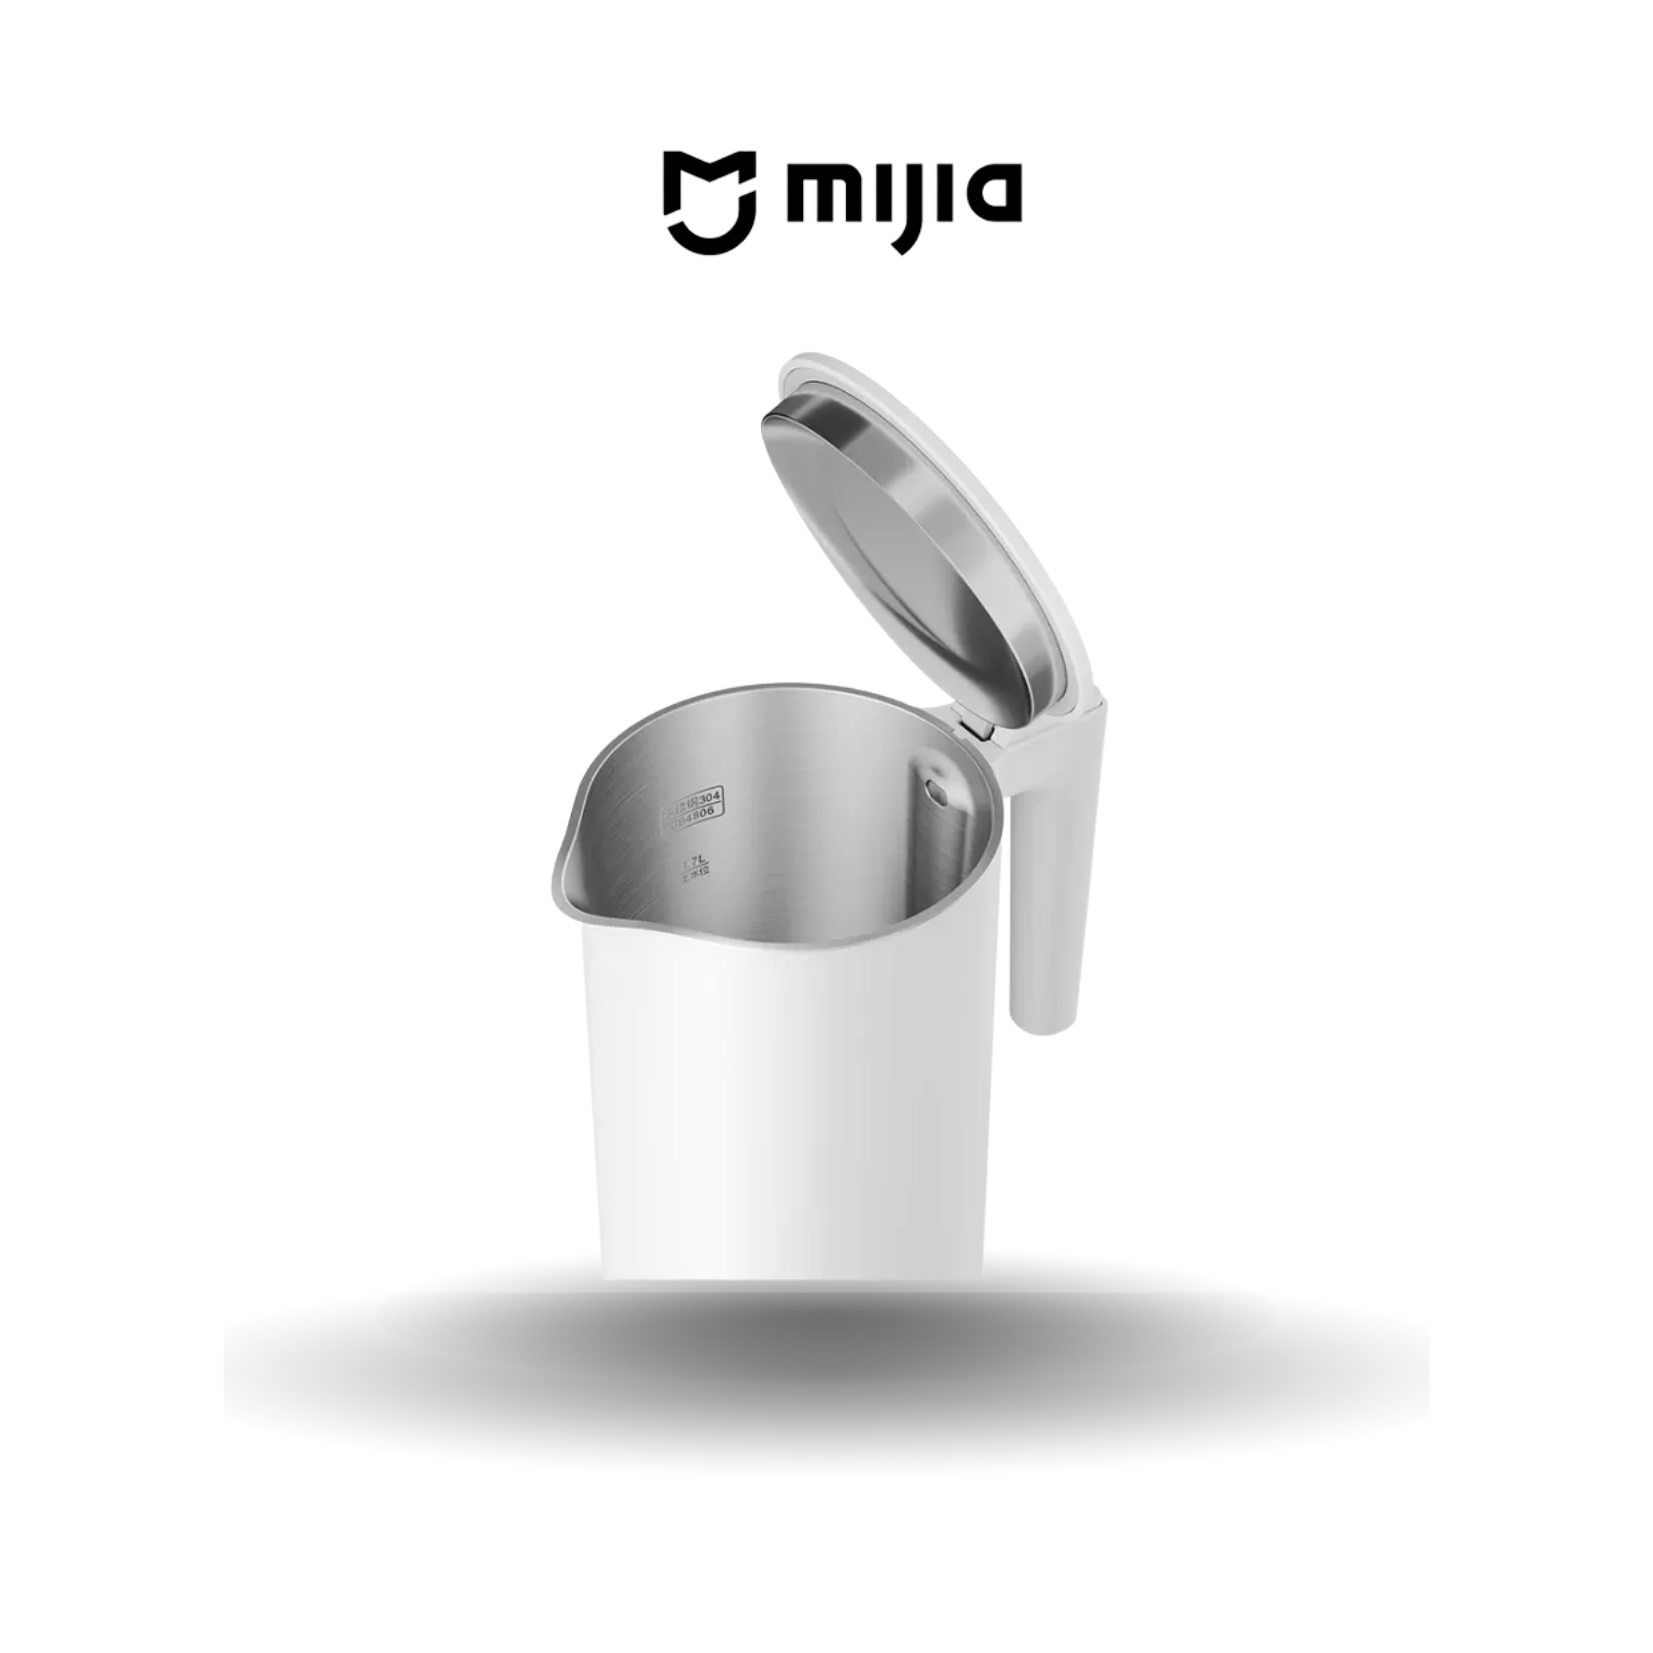 Mijia Smart Electric Water Kettle 2 - 1.7L Large Capacity 1800W High Power STRIX Thermostat